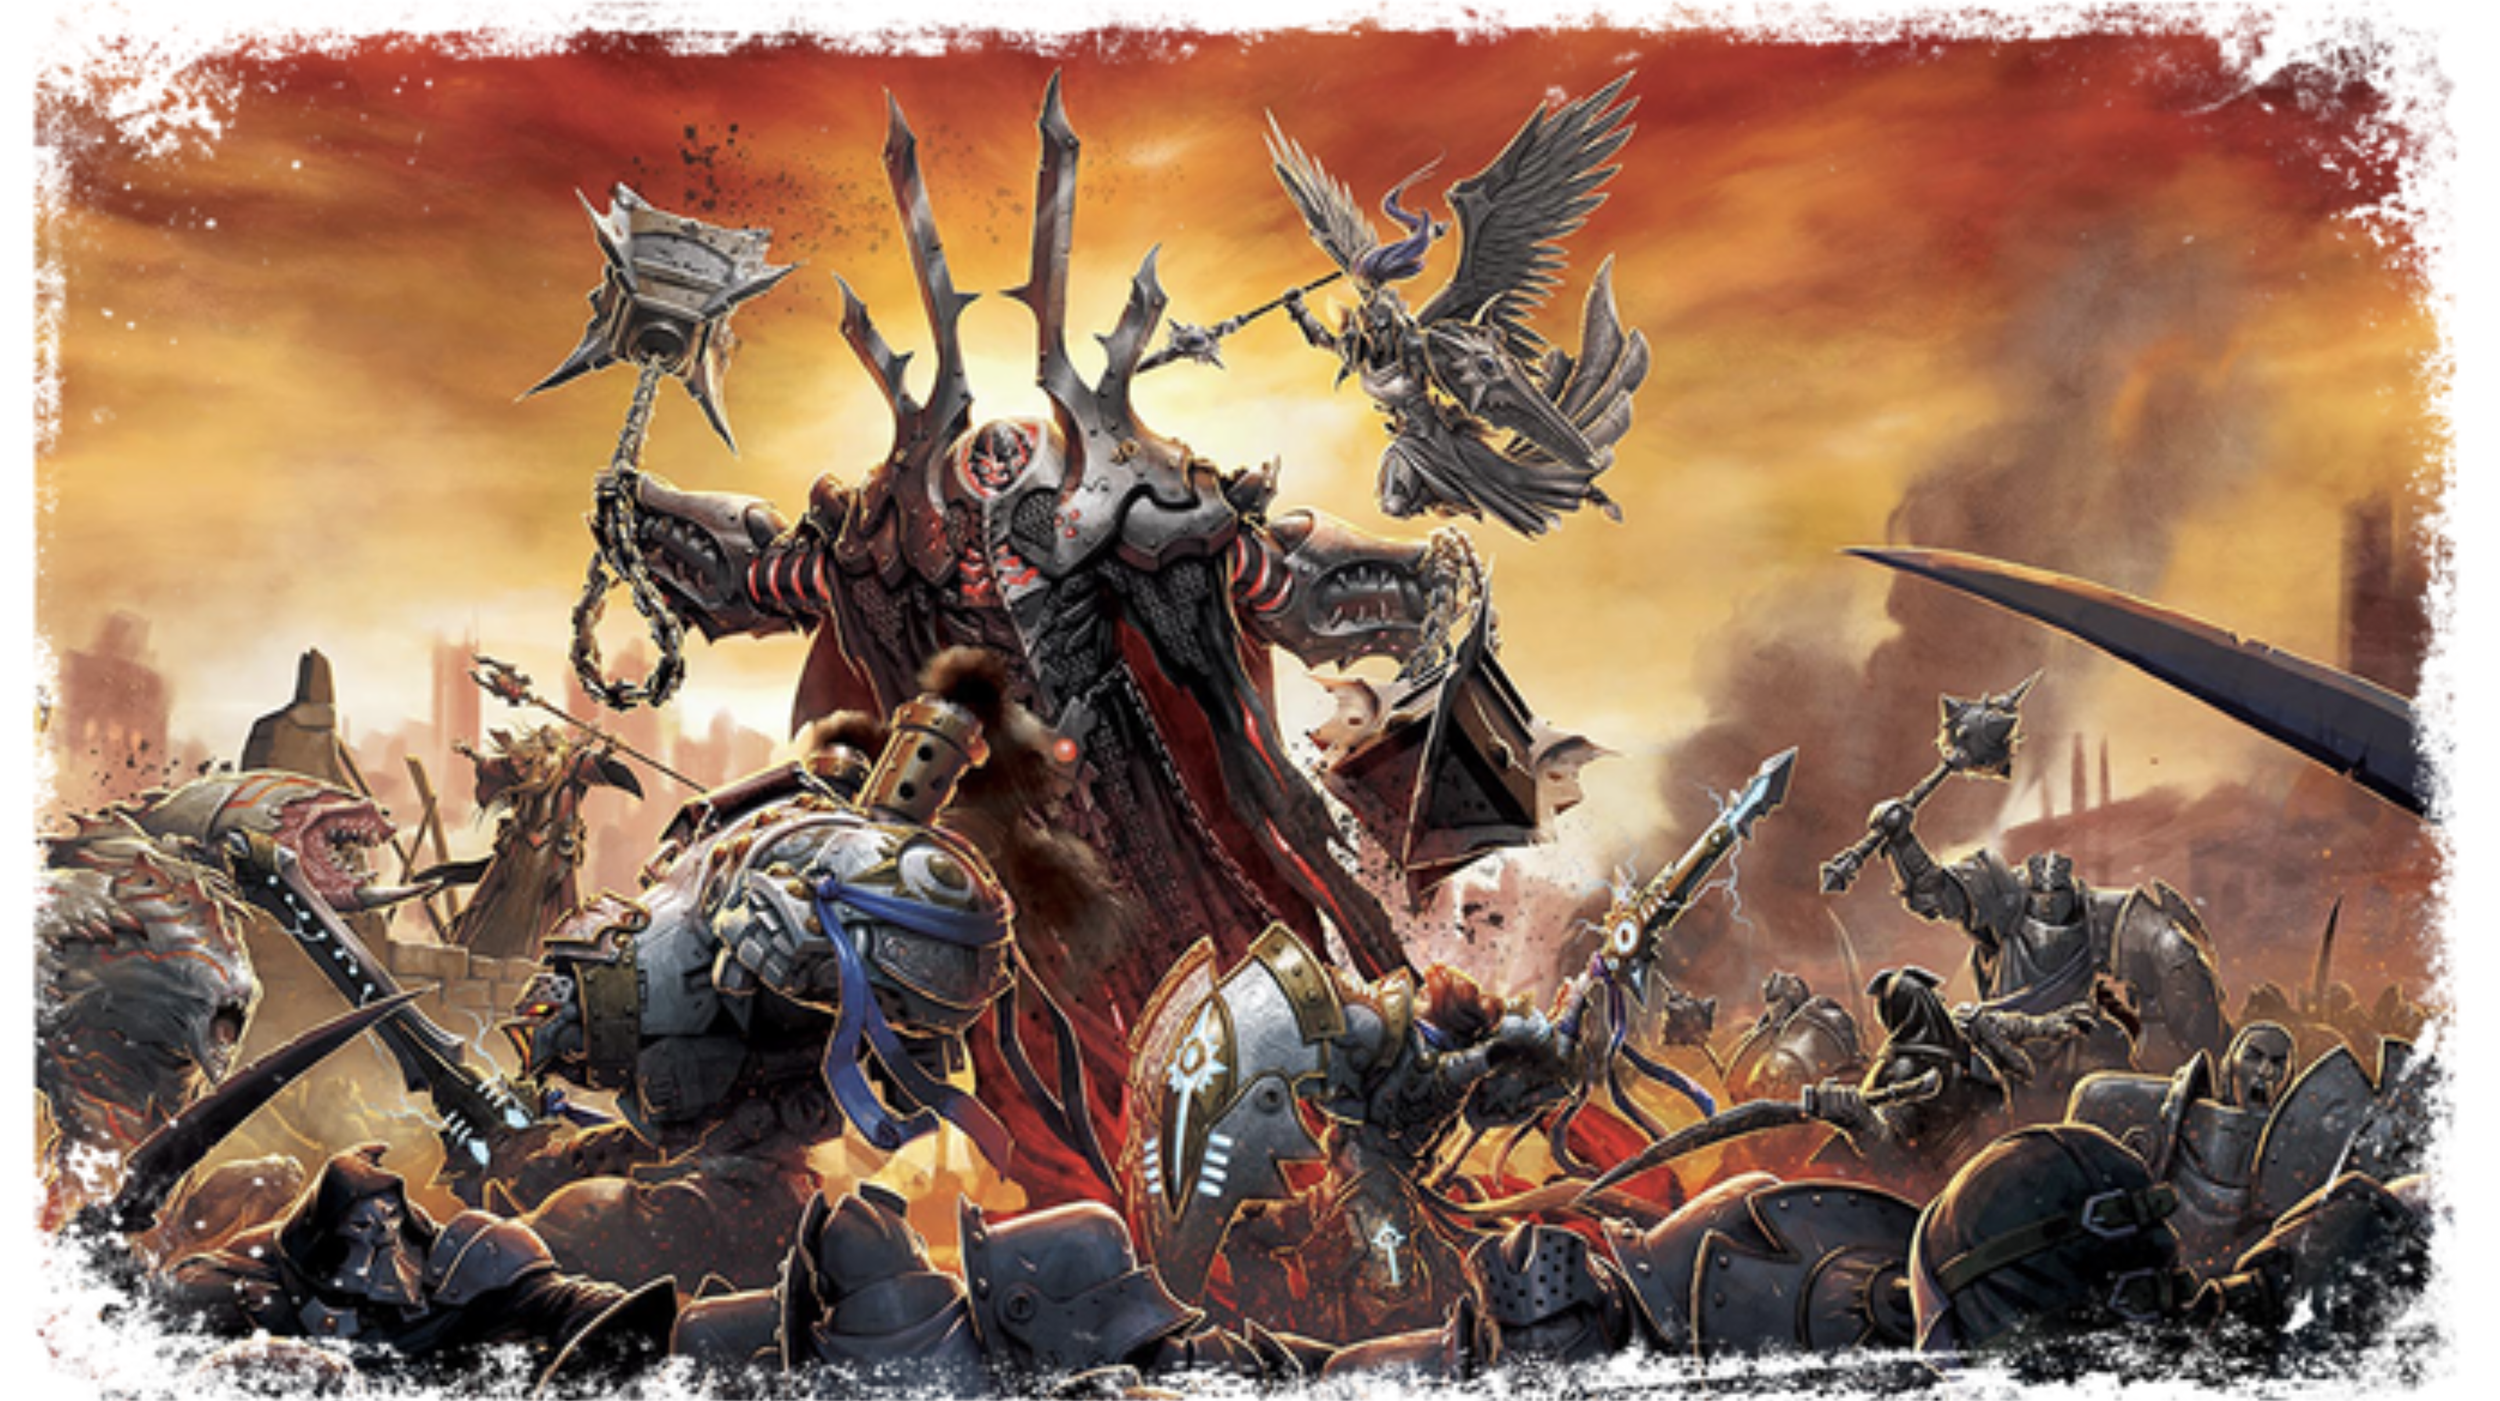 Iron Kingdoms mixes Warhammer's battles with D&D's roleplaying in